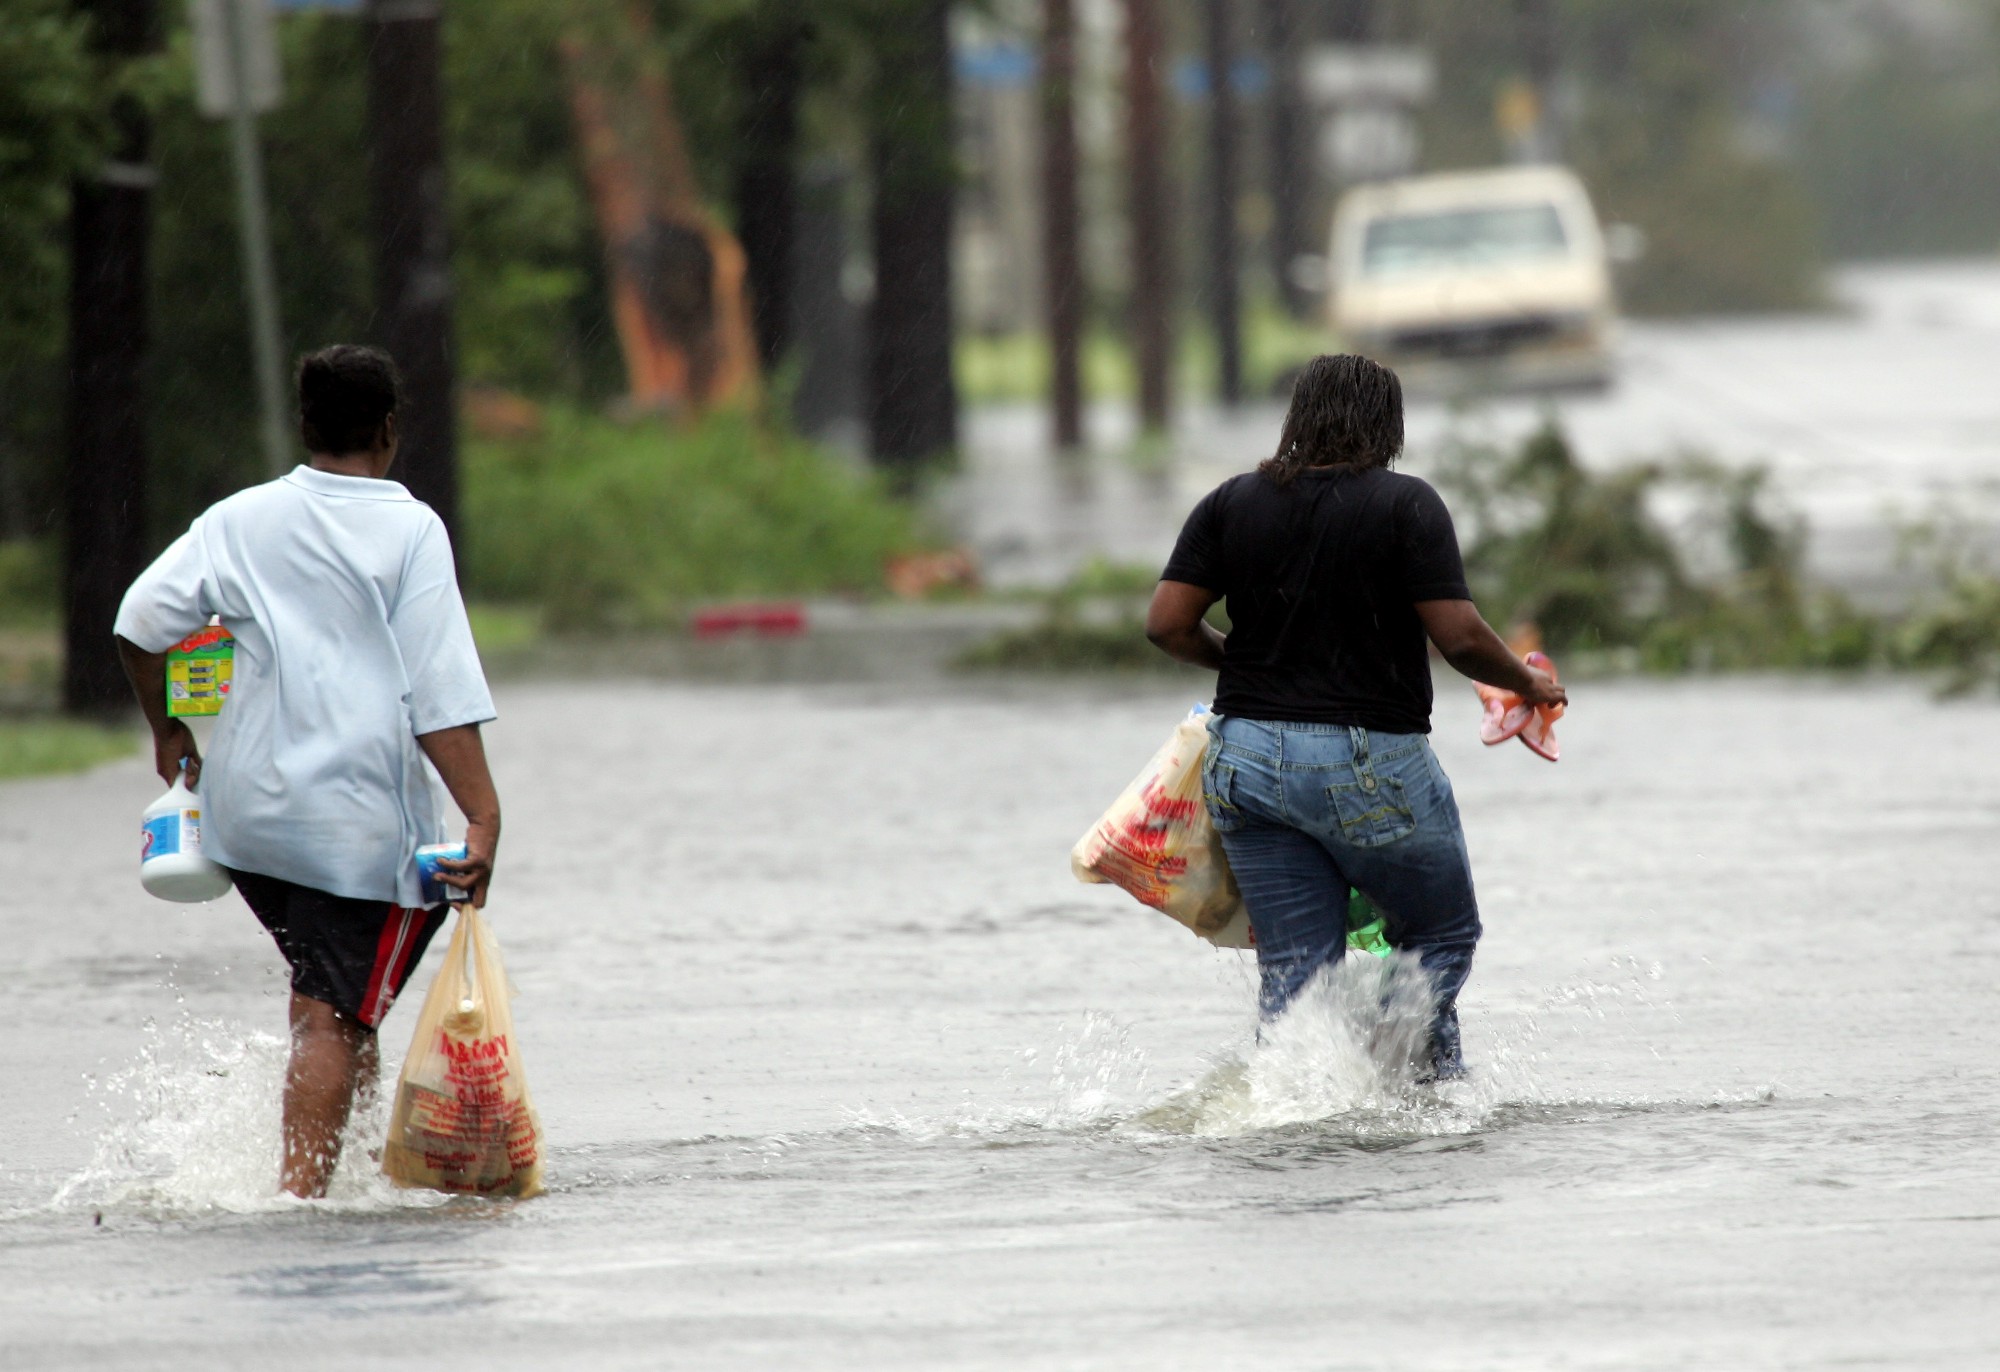 People carry bags of groceries through floodwaters after taking the merchandise away from a wind damaged convenience store in New Orleans on Monday, Aug. 29, 2005. (AP Photo/Dave Martin)